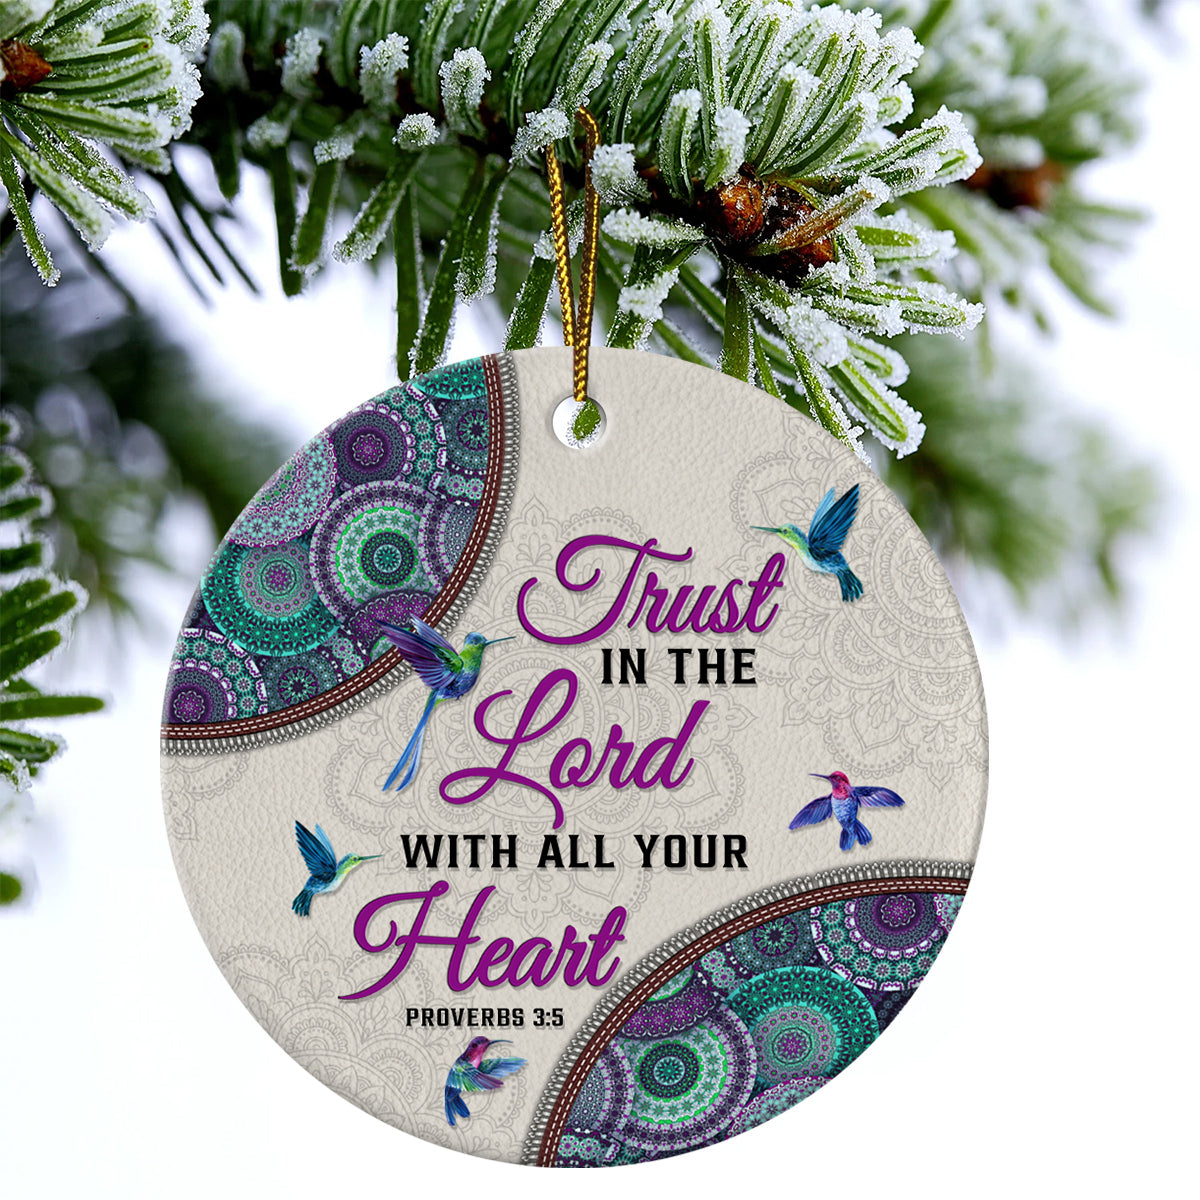 Jesus Ceramic Christmas Ornament - Trust In The Lord With All Your Heart Ceramic Ornament, Perfect Gift For Christian, God Faith Believers